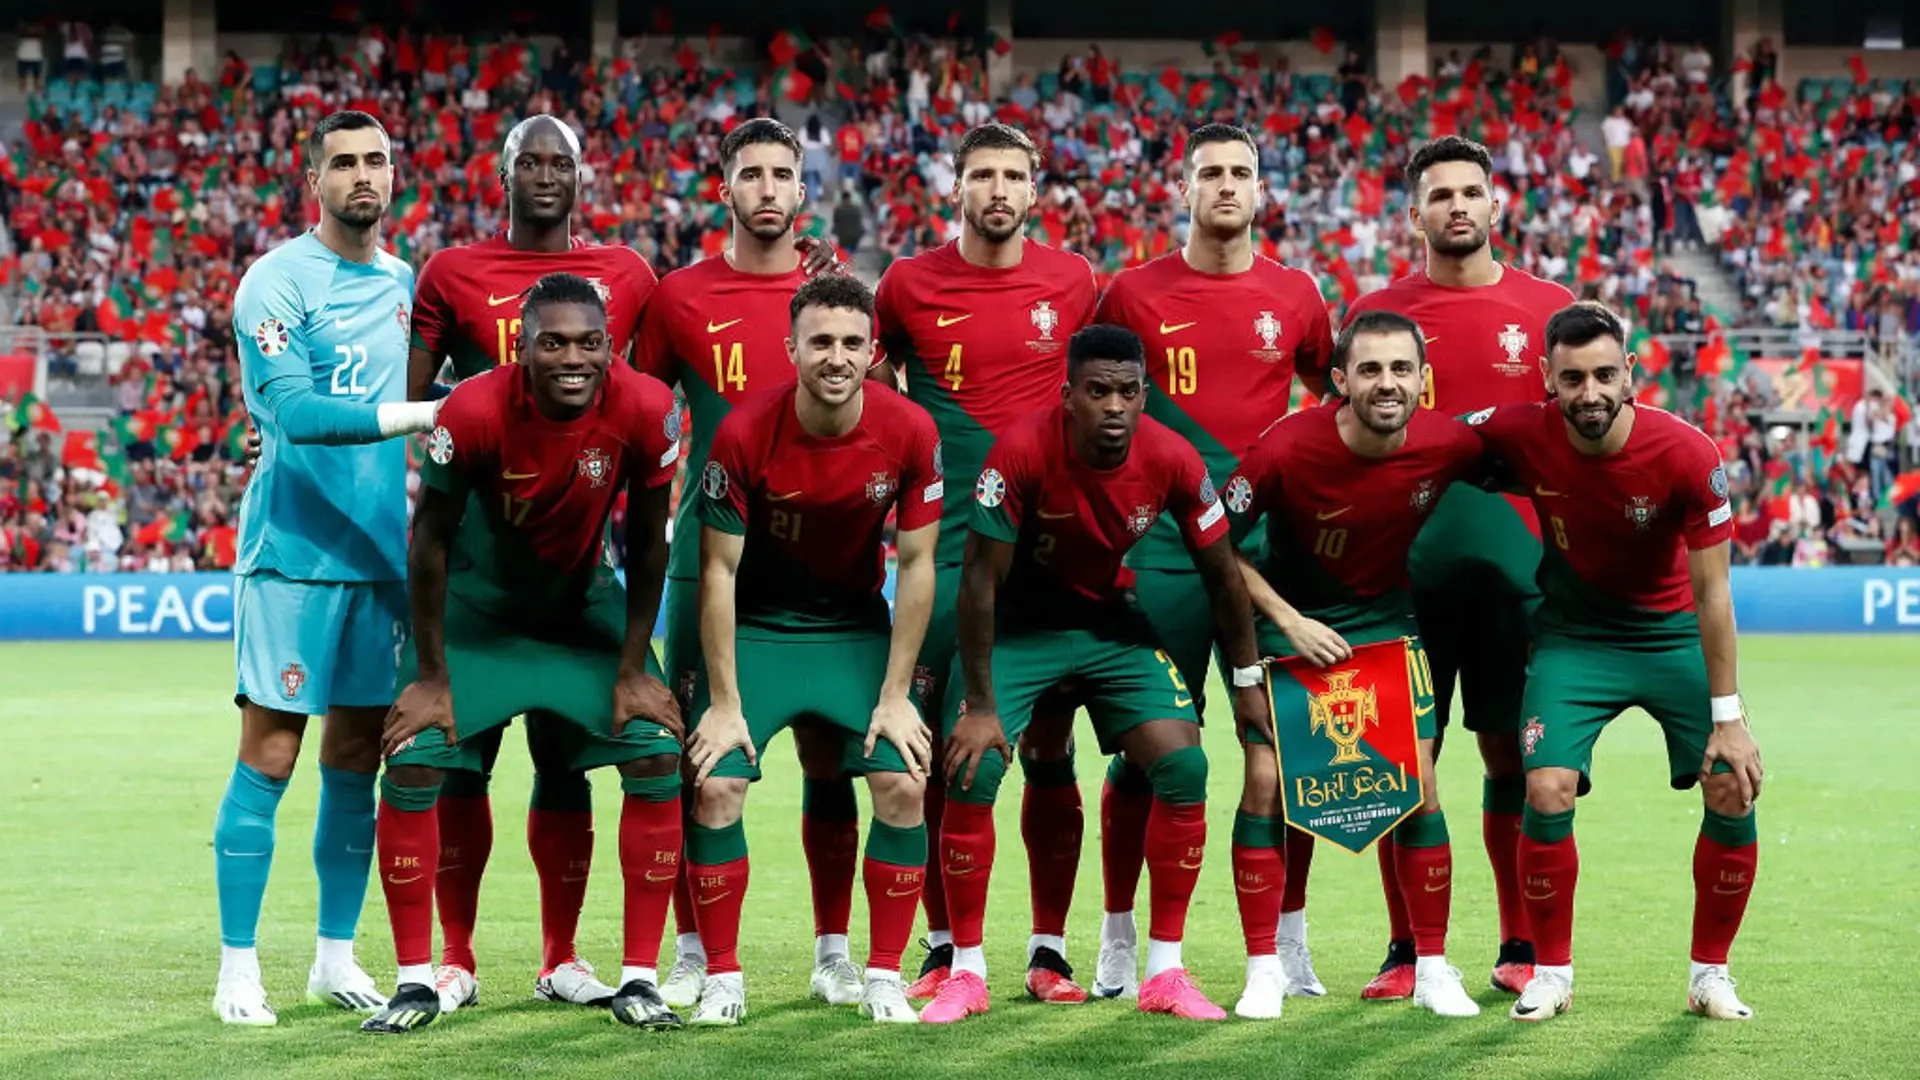 Portugal national football team vs Luxembourg national football